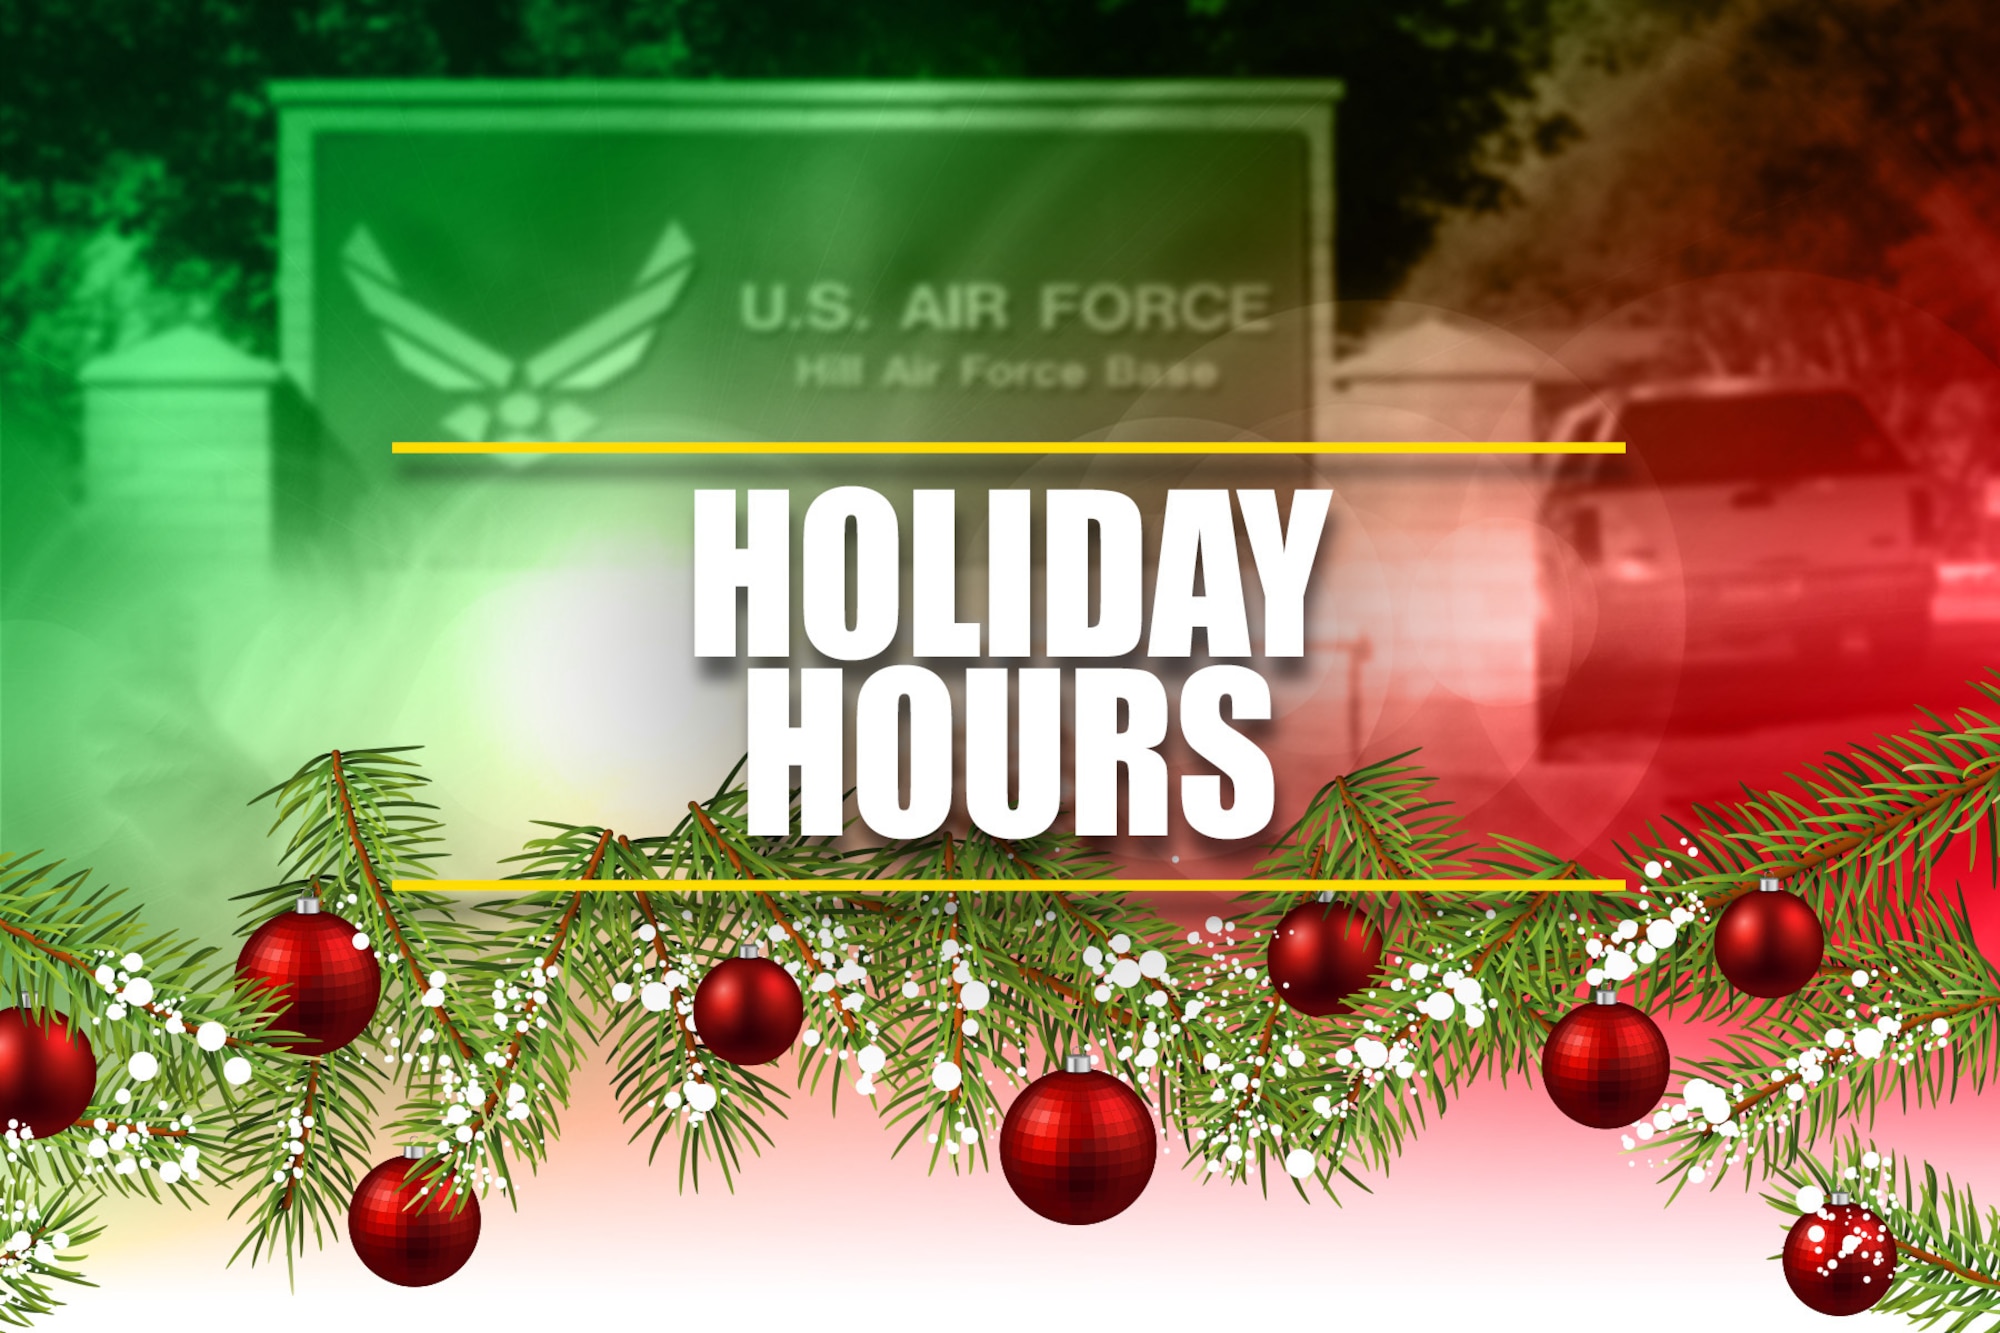 Many offices and services at Hill Air Force Base will be closed or have limited hours Dec. 23-24, Dec. 31 and Jan. 3 in conjunction with the Christmas and New Year's federal holidays.